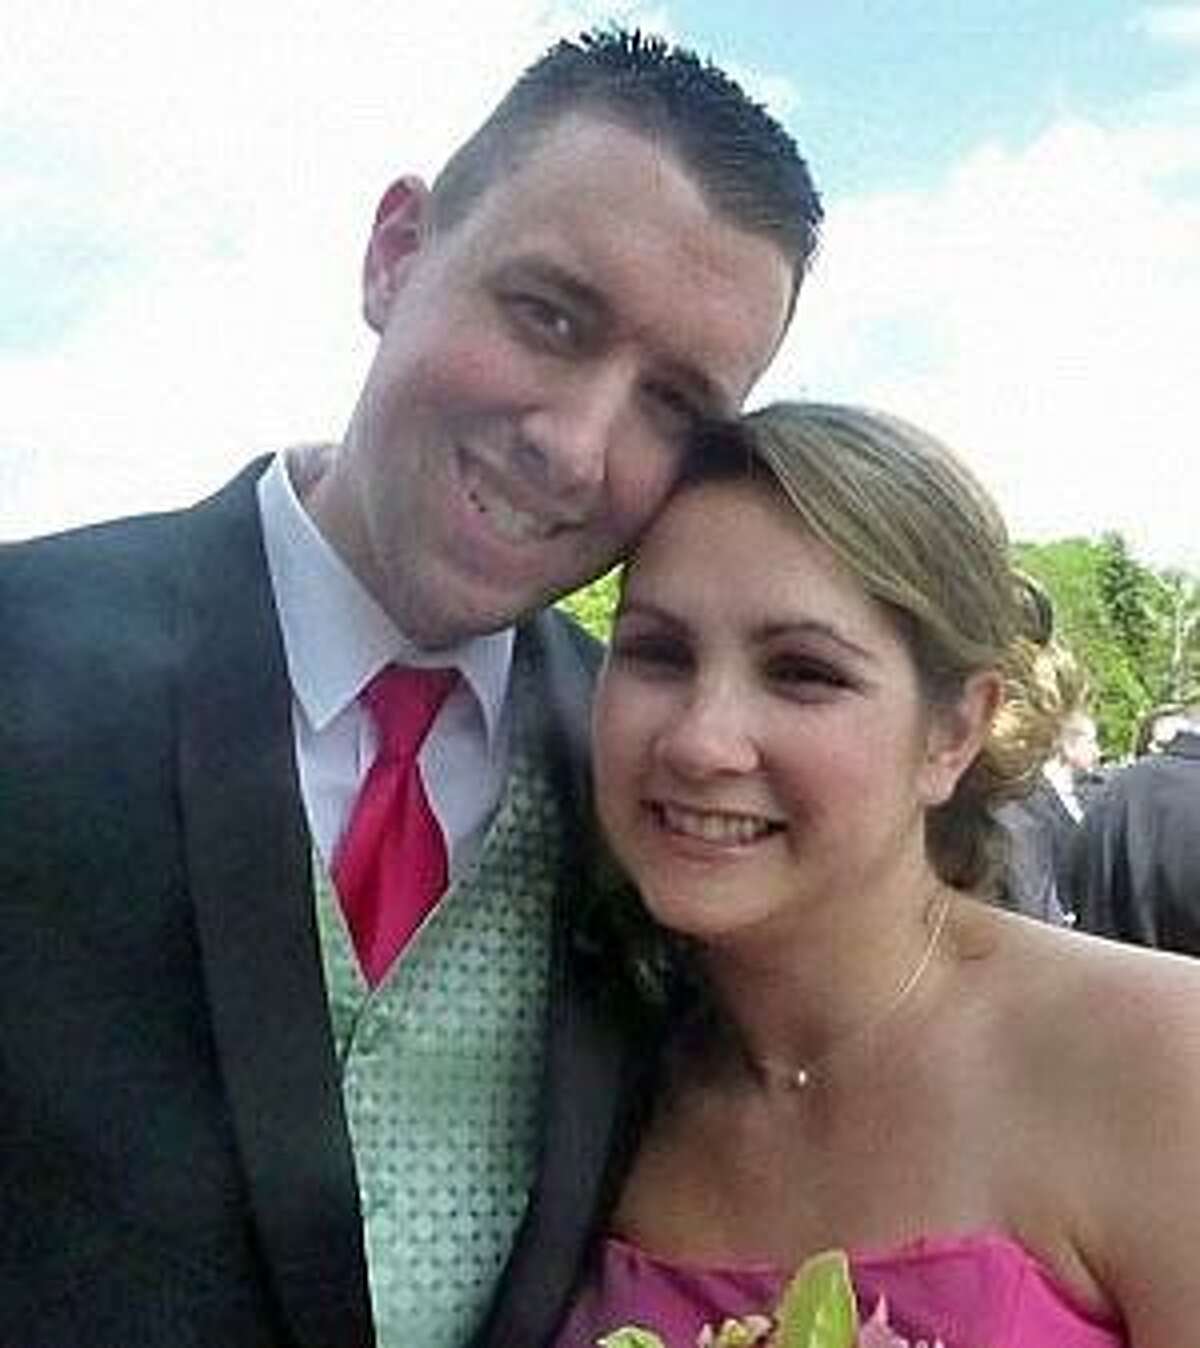 The late Danbury police Sgt. Drew Carlson and his wife, Erin